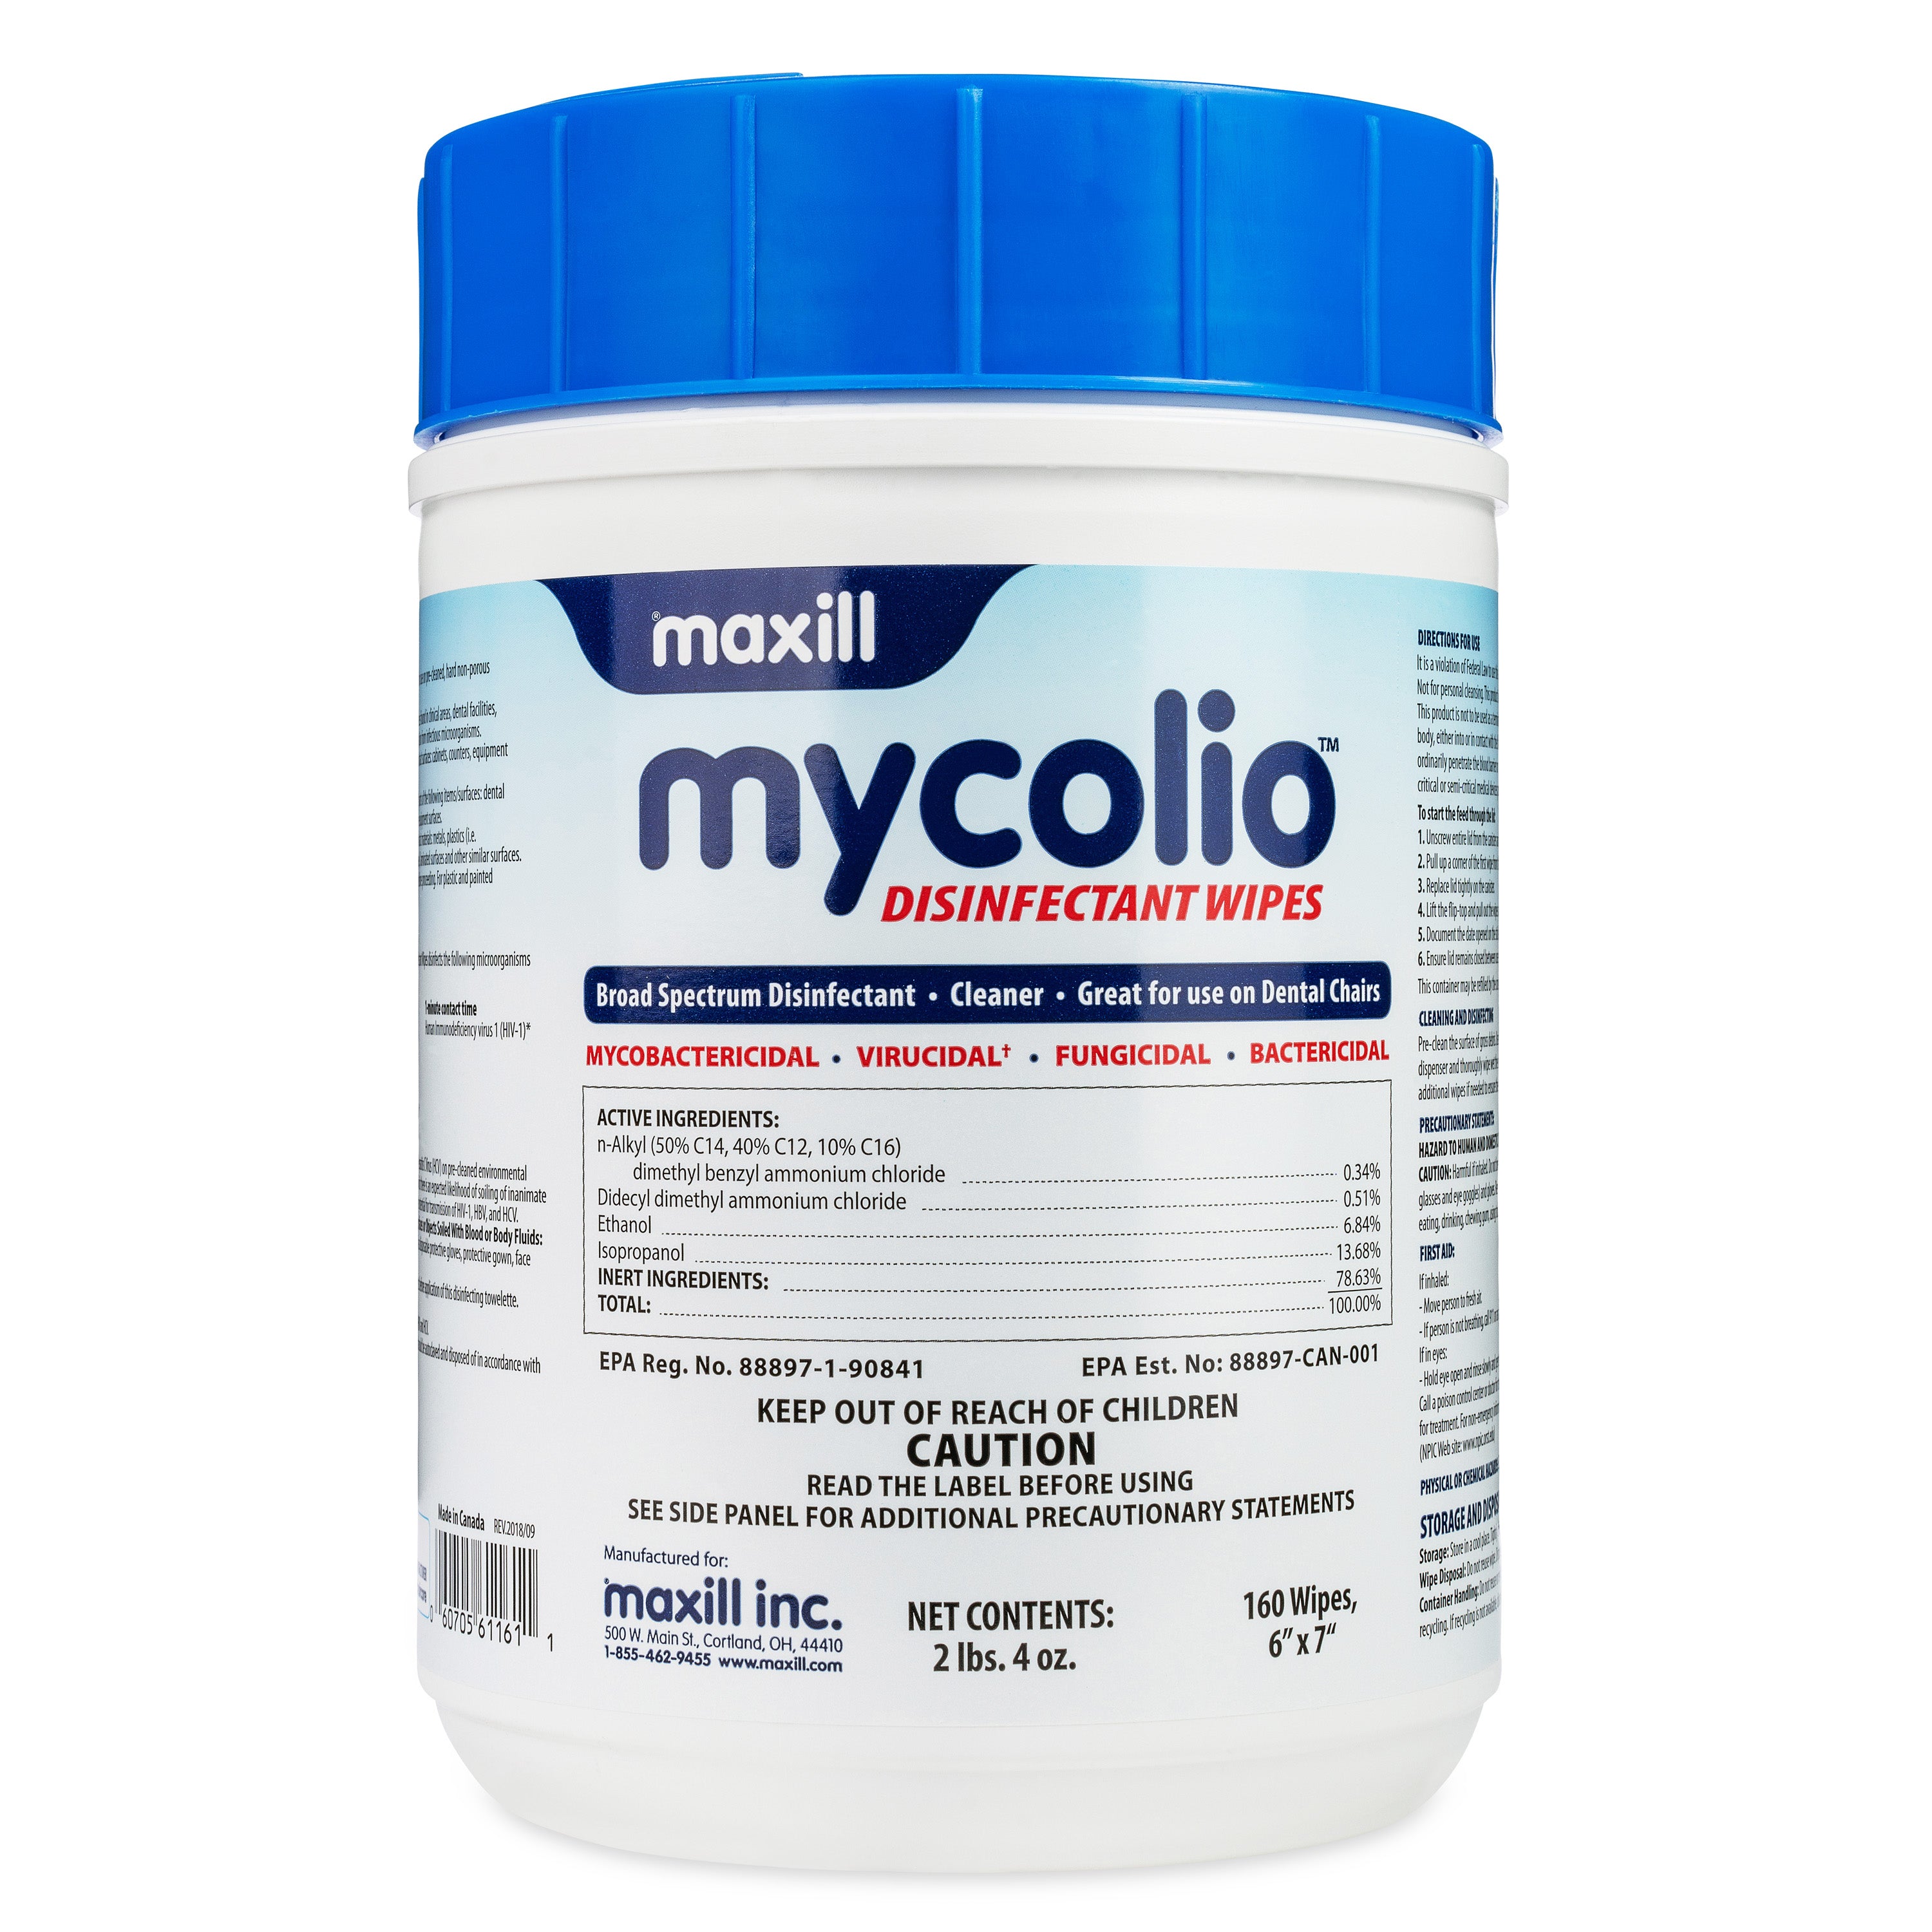 Maxill Mycolio Disinfecting Wipes (160Ct) Large 6x7